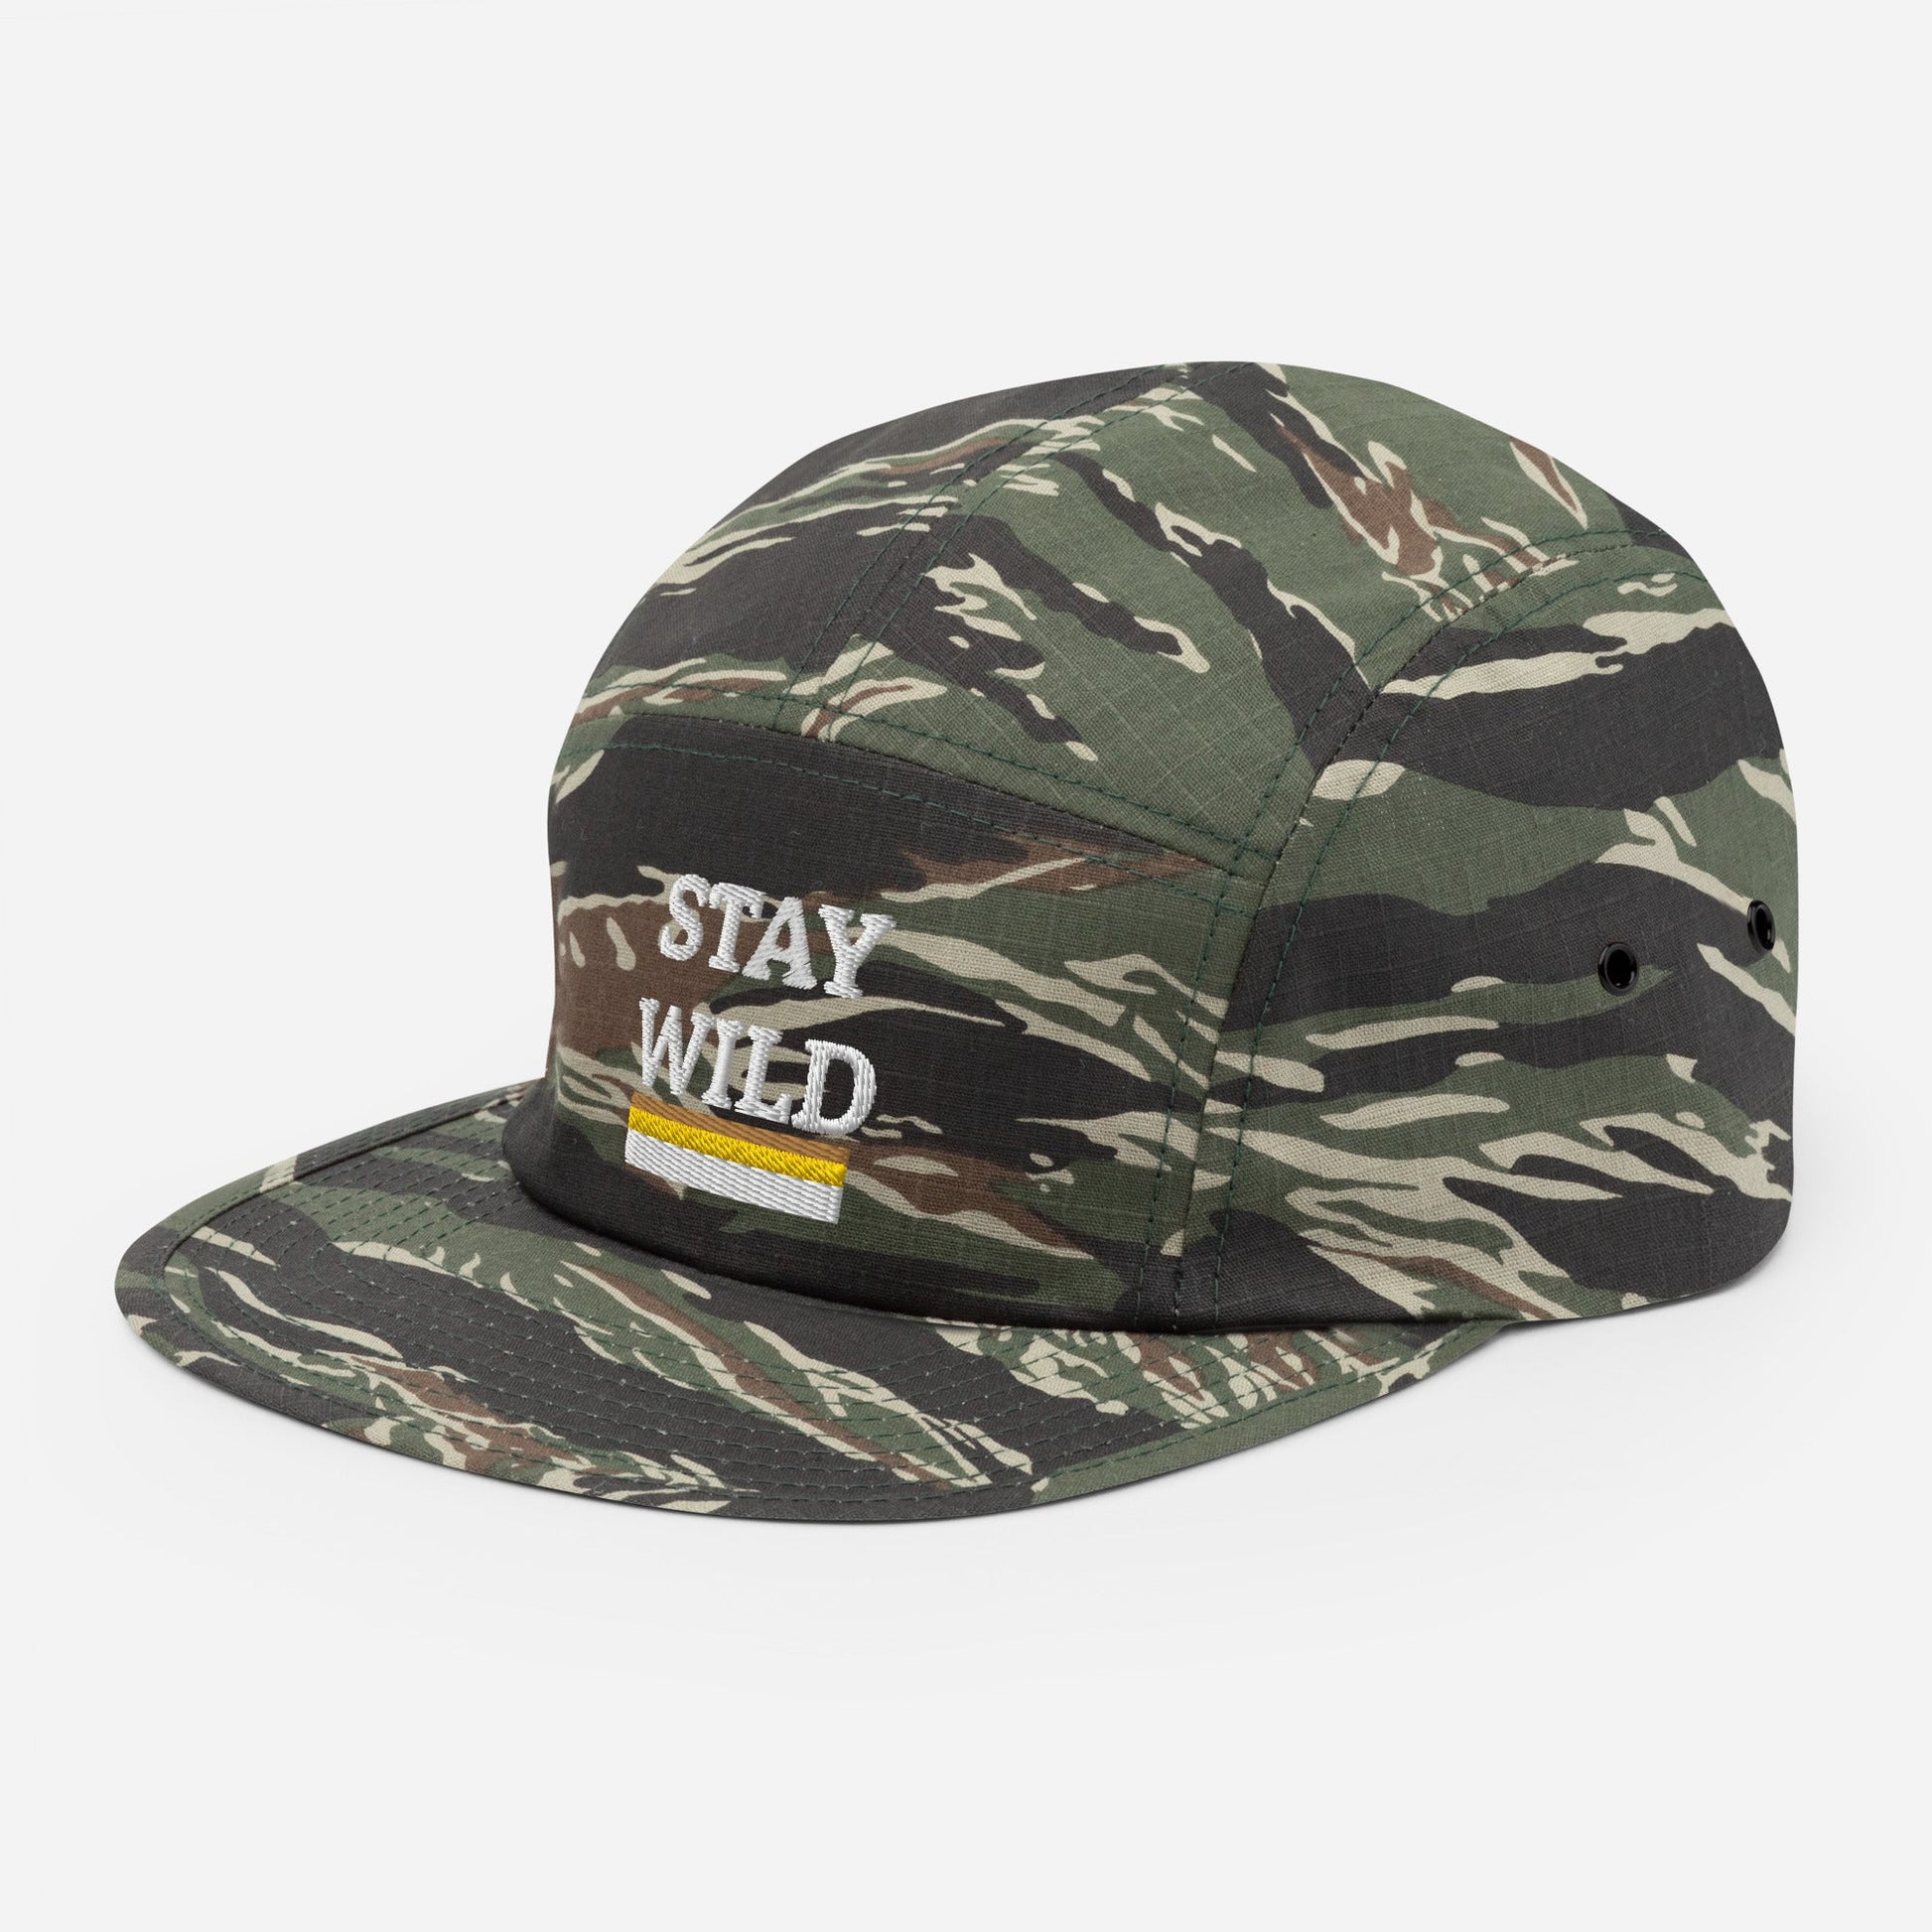 STAY WILD Embroidered Five Panel Camper Cap - Appalachian Bittersweet - 5 panel camper